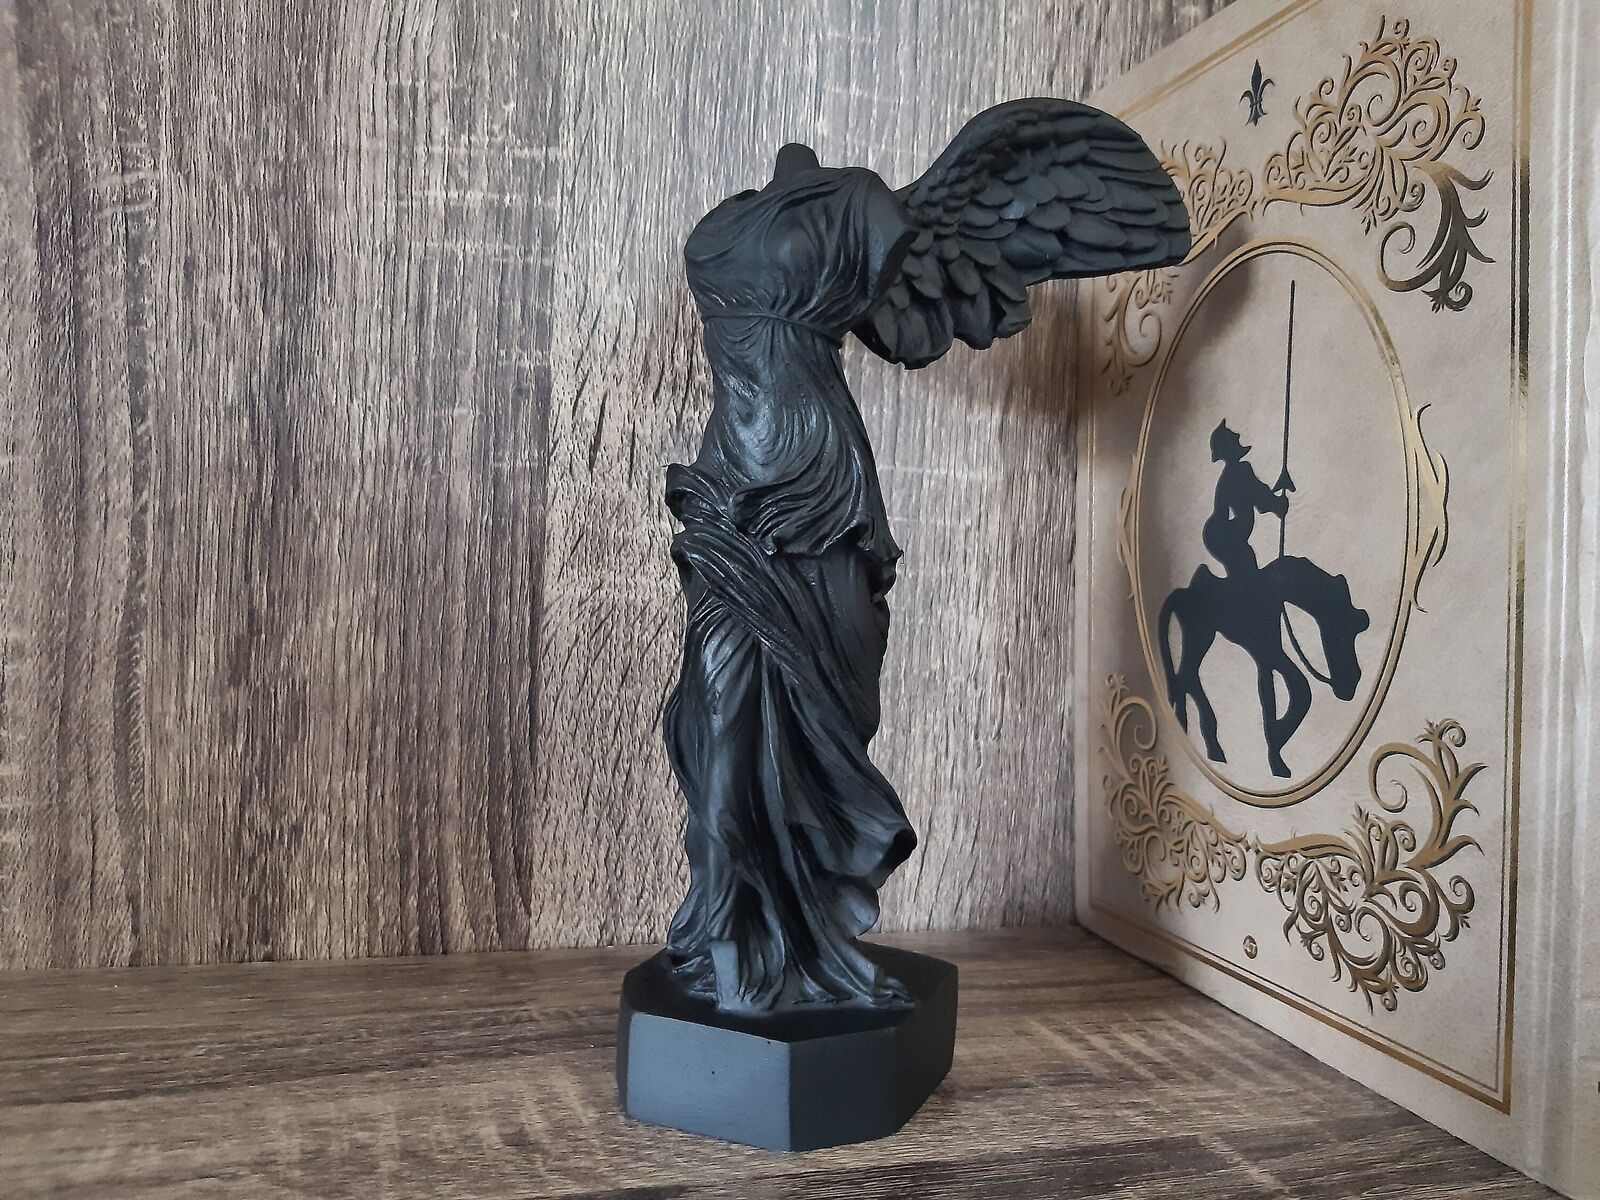 Constraints Readability Company Nike Winged Victory of Samothrace Replica Louvre Museum Sculpture Handmade  | eBay